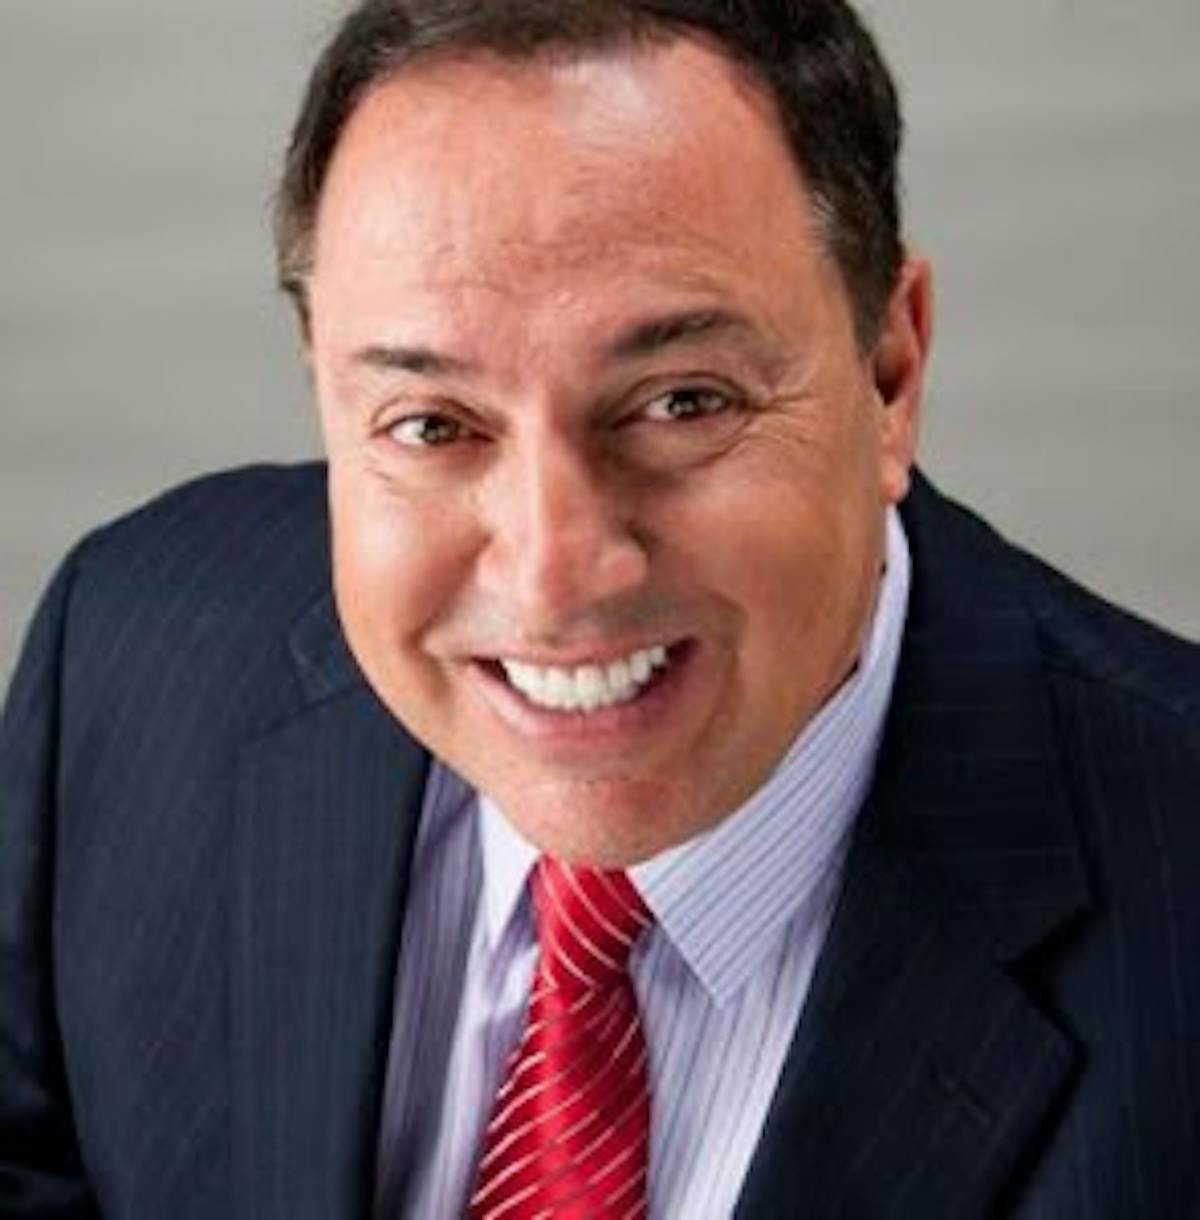 Richie Minervini wearing a suit and tie